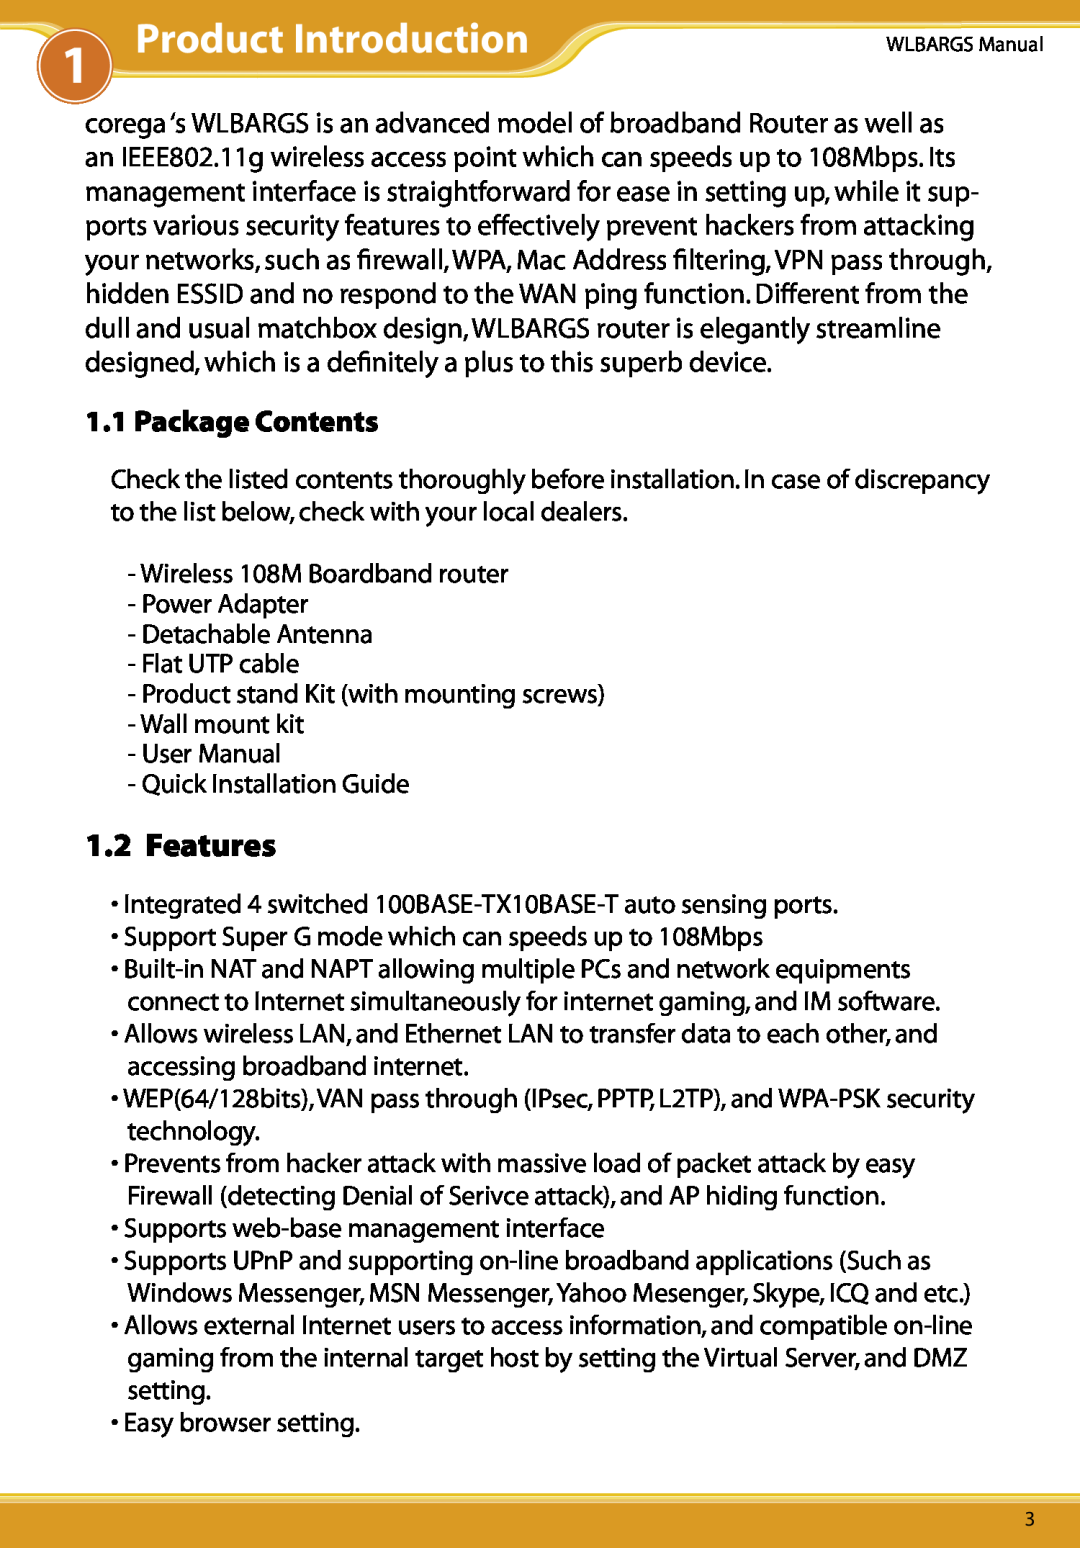 Allied Telesis CG-WLBARGS manual Product Introduction, Features, Package Contents 